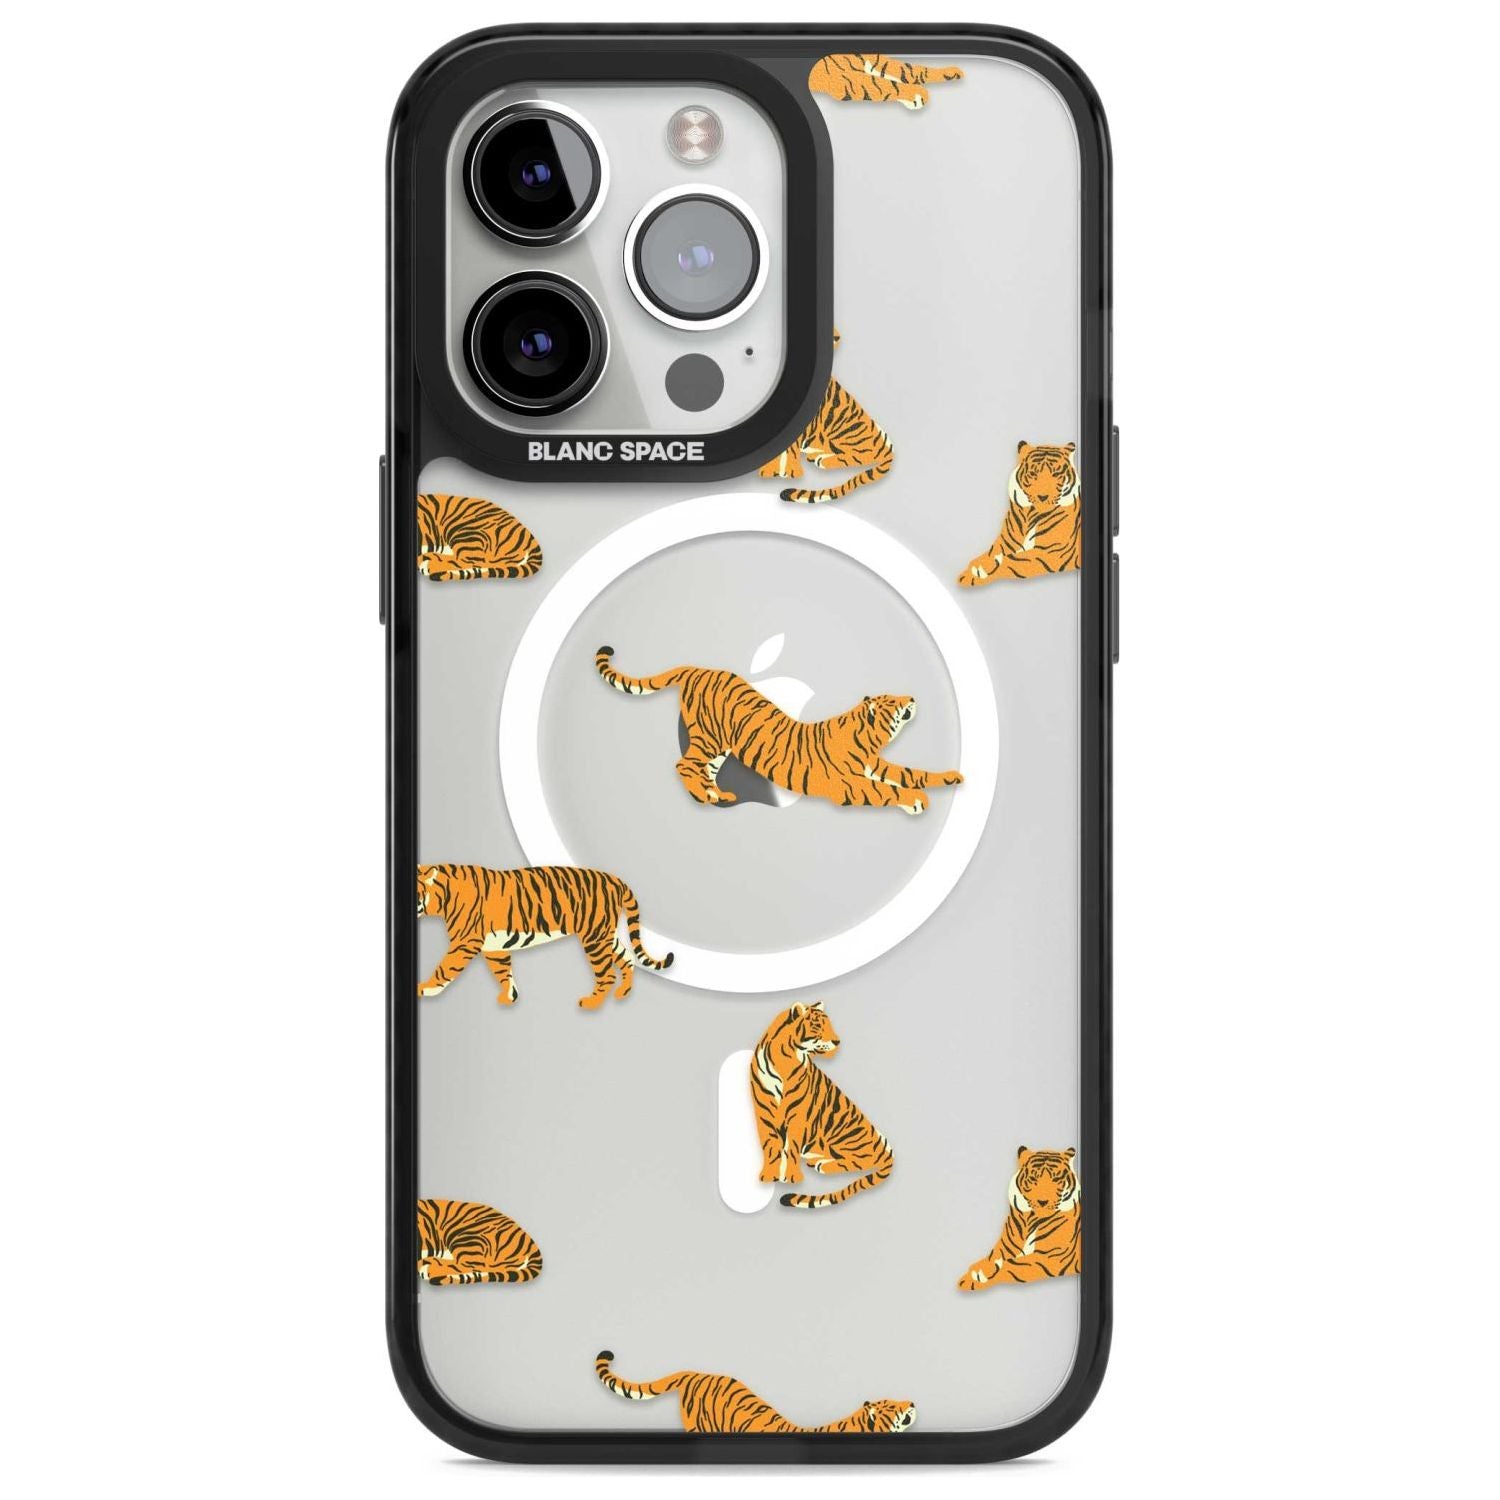 Clear Tiger Jungle Cat Pattern Phone Case iPhone 15 Pro Max / Magsafe Black Impact Case,iPhone 15 Pro / Magsafe Black Impact Case,iPhone 14 Pro Max / Magsafe Black Impact Case,iPhone 14 Pro / Magsafe Black Impact Case,iPhone 13 Pro / Magsafe Black Impact Case Blanc Space